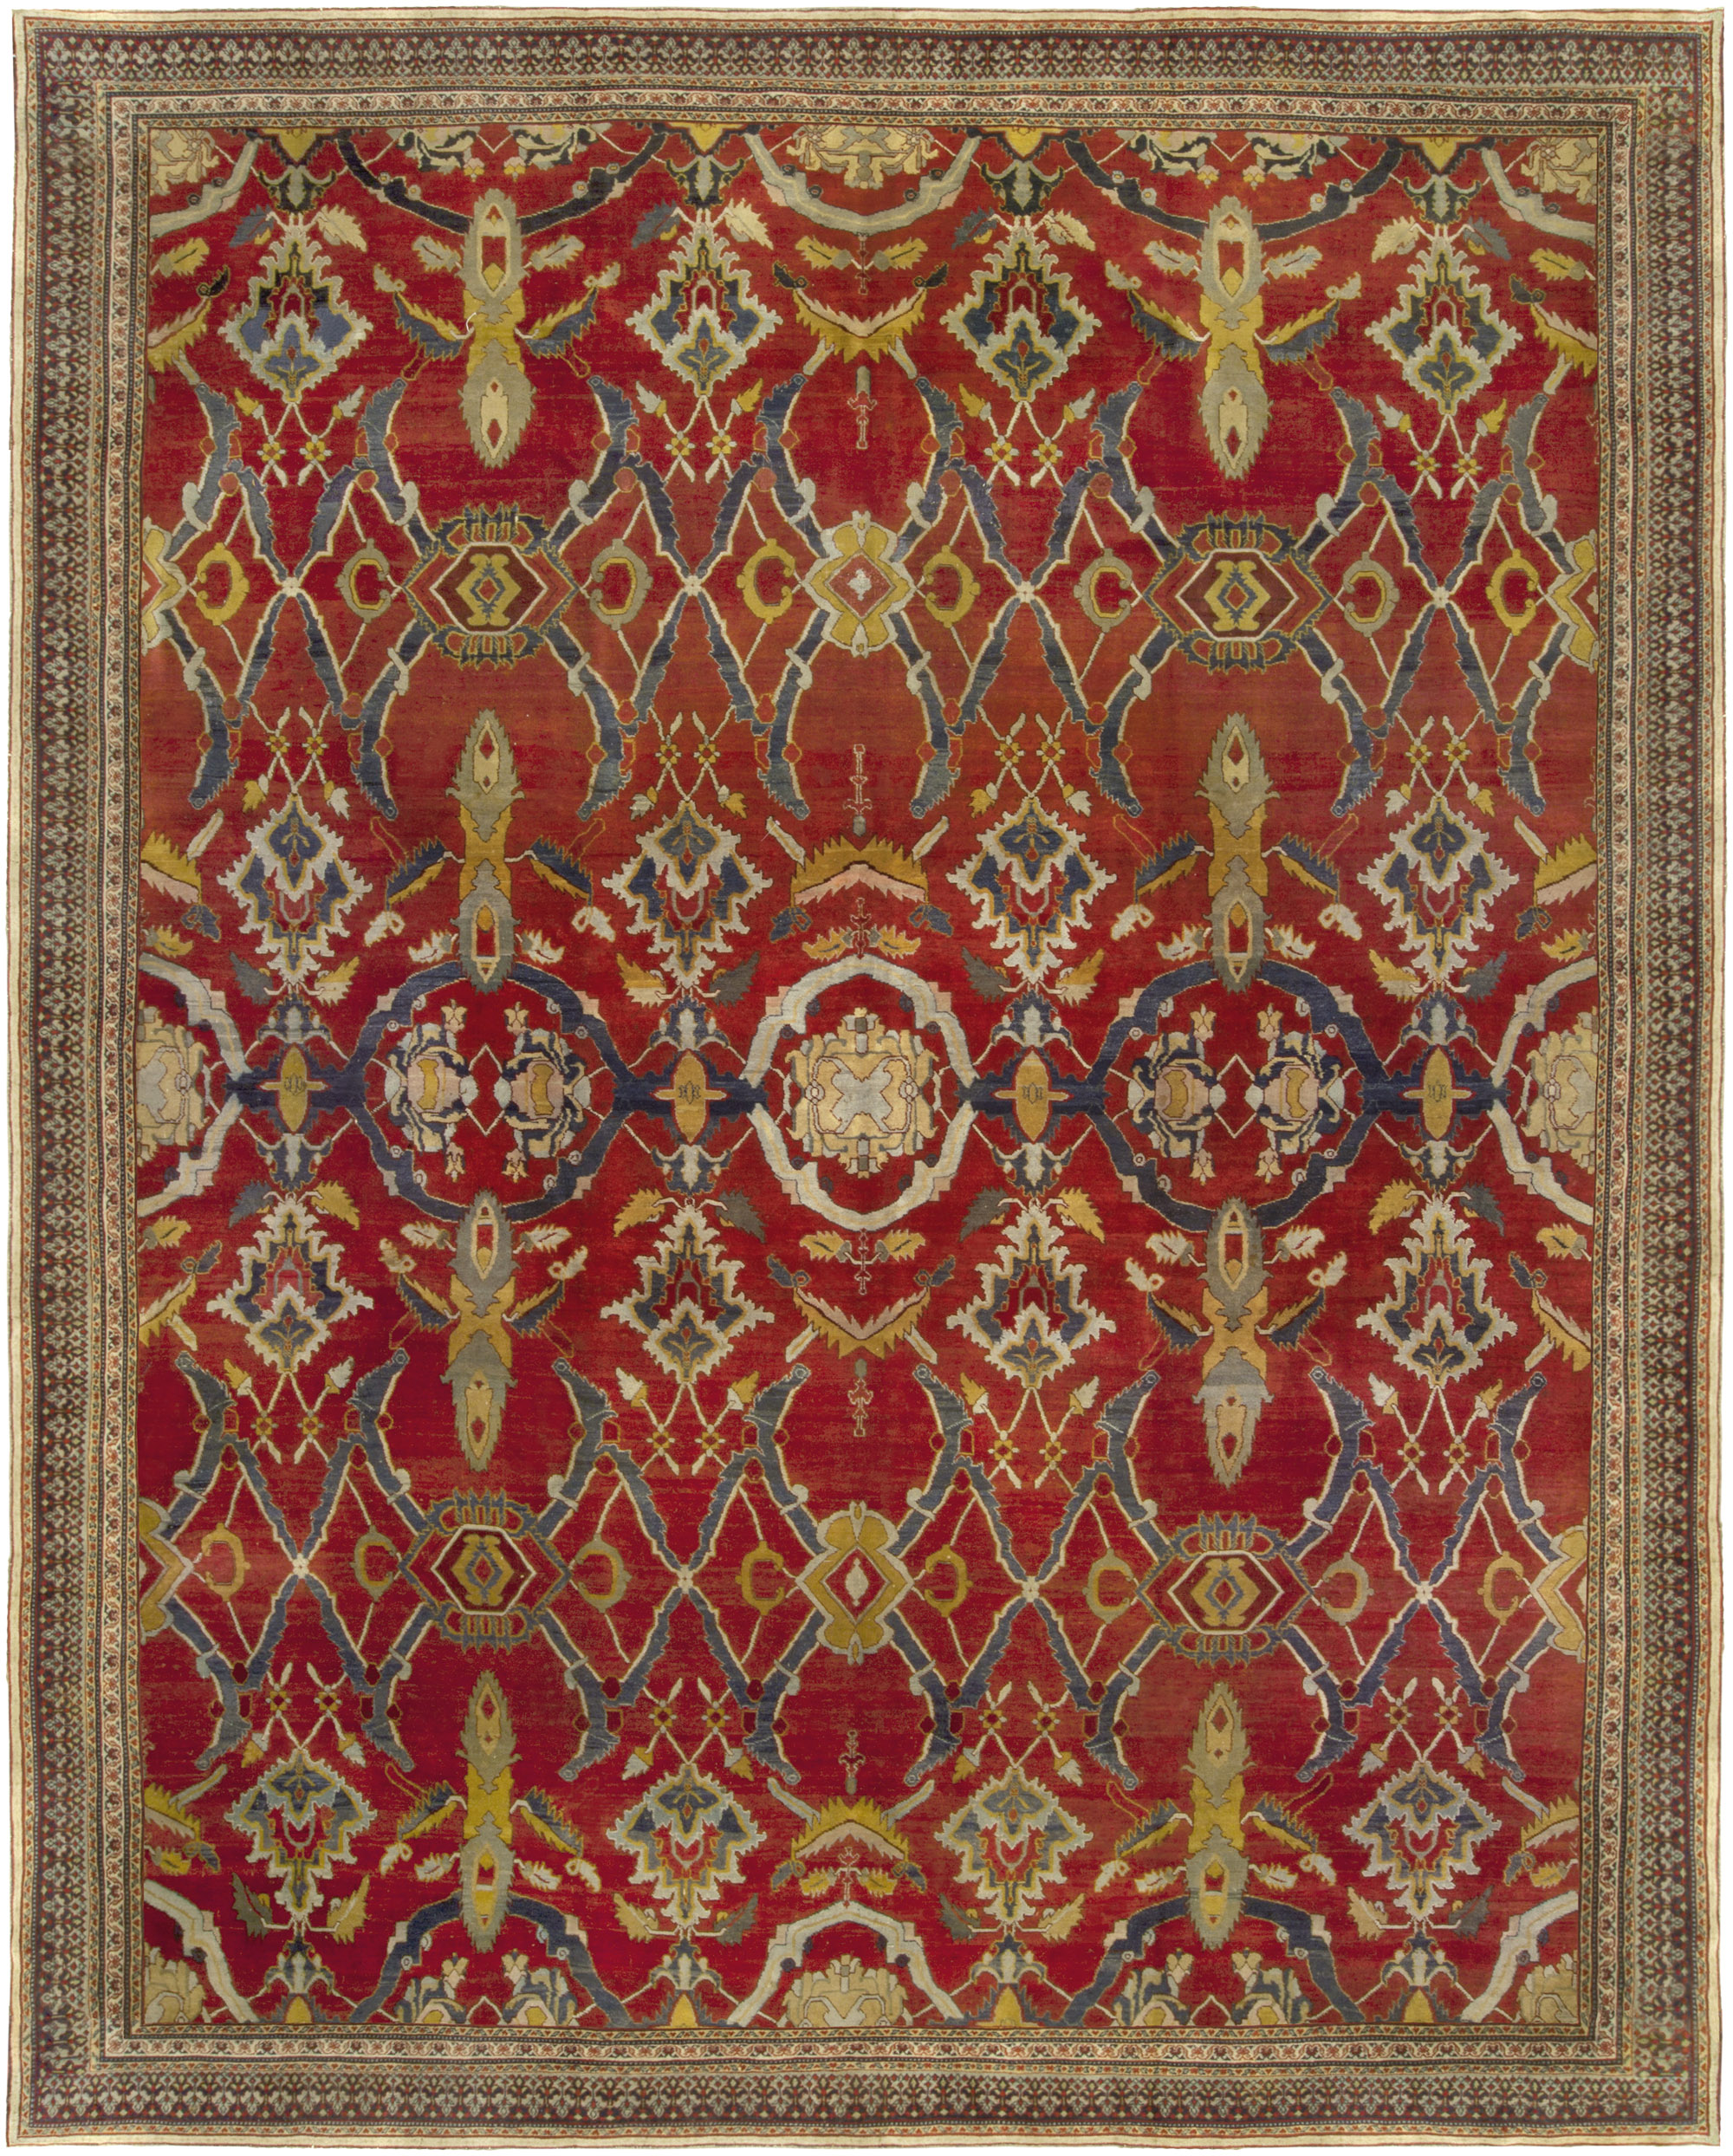 antique indian rugs agra red floral red abstract floral bb5109 13x11